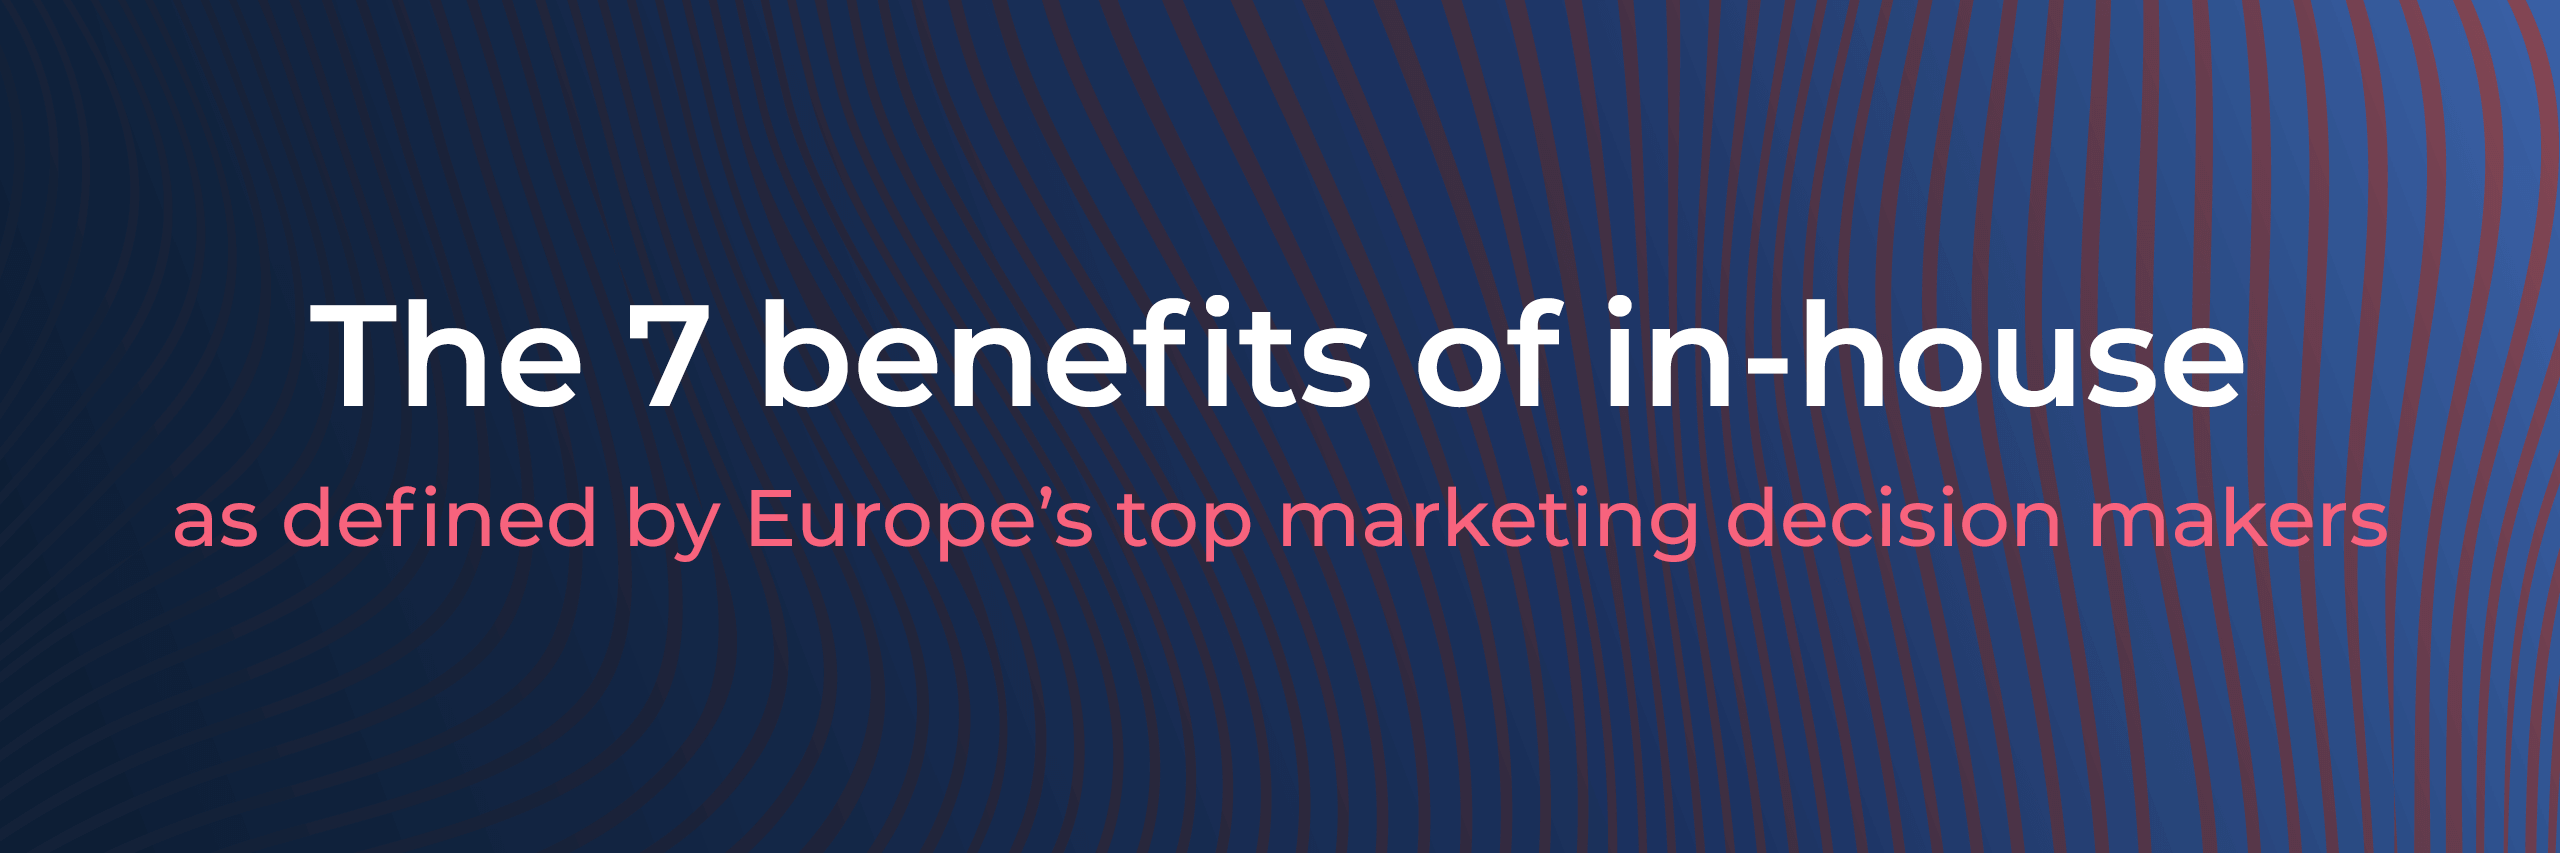 7 benefits of in-house as defined by Europe’s Top Marketing Chiefs